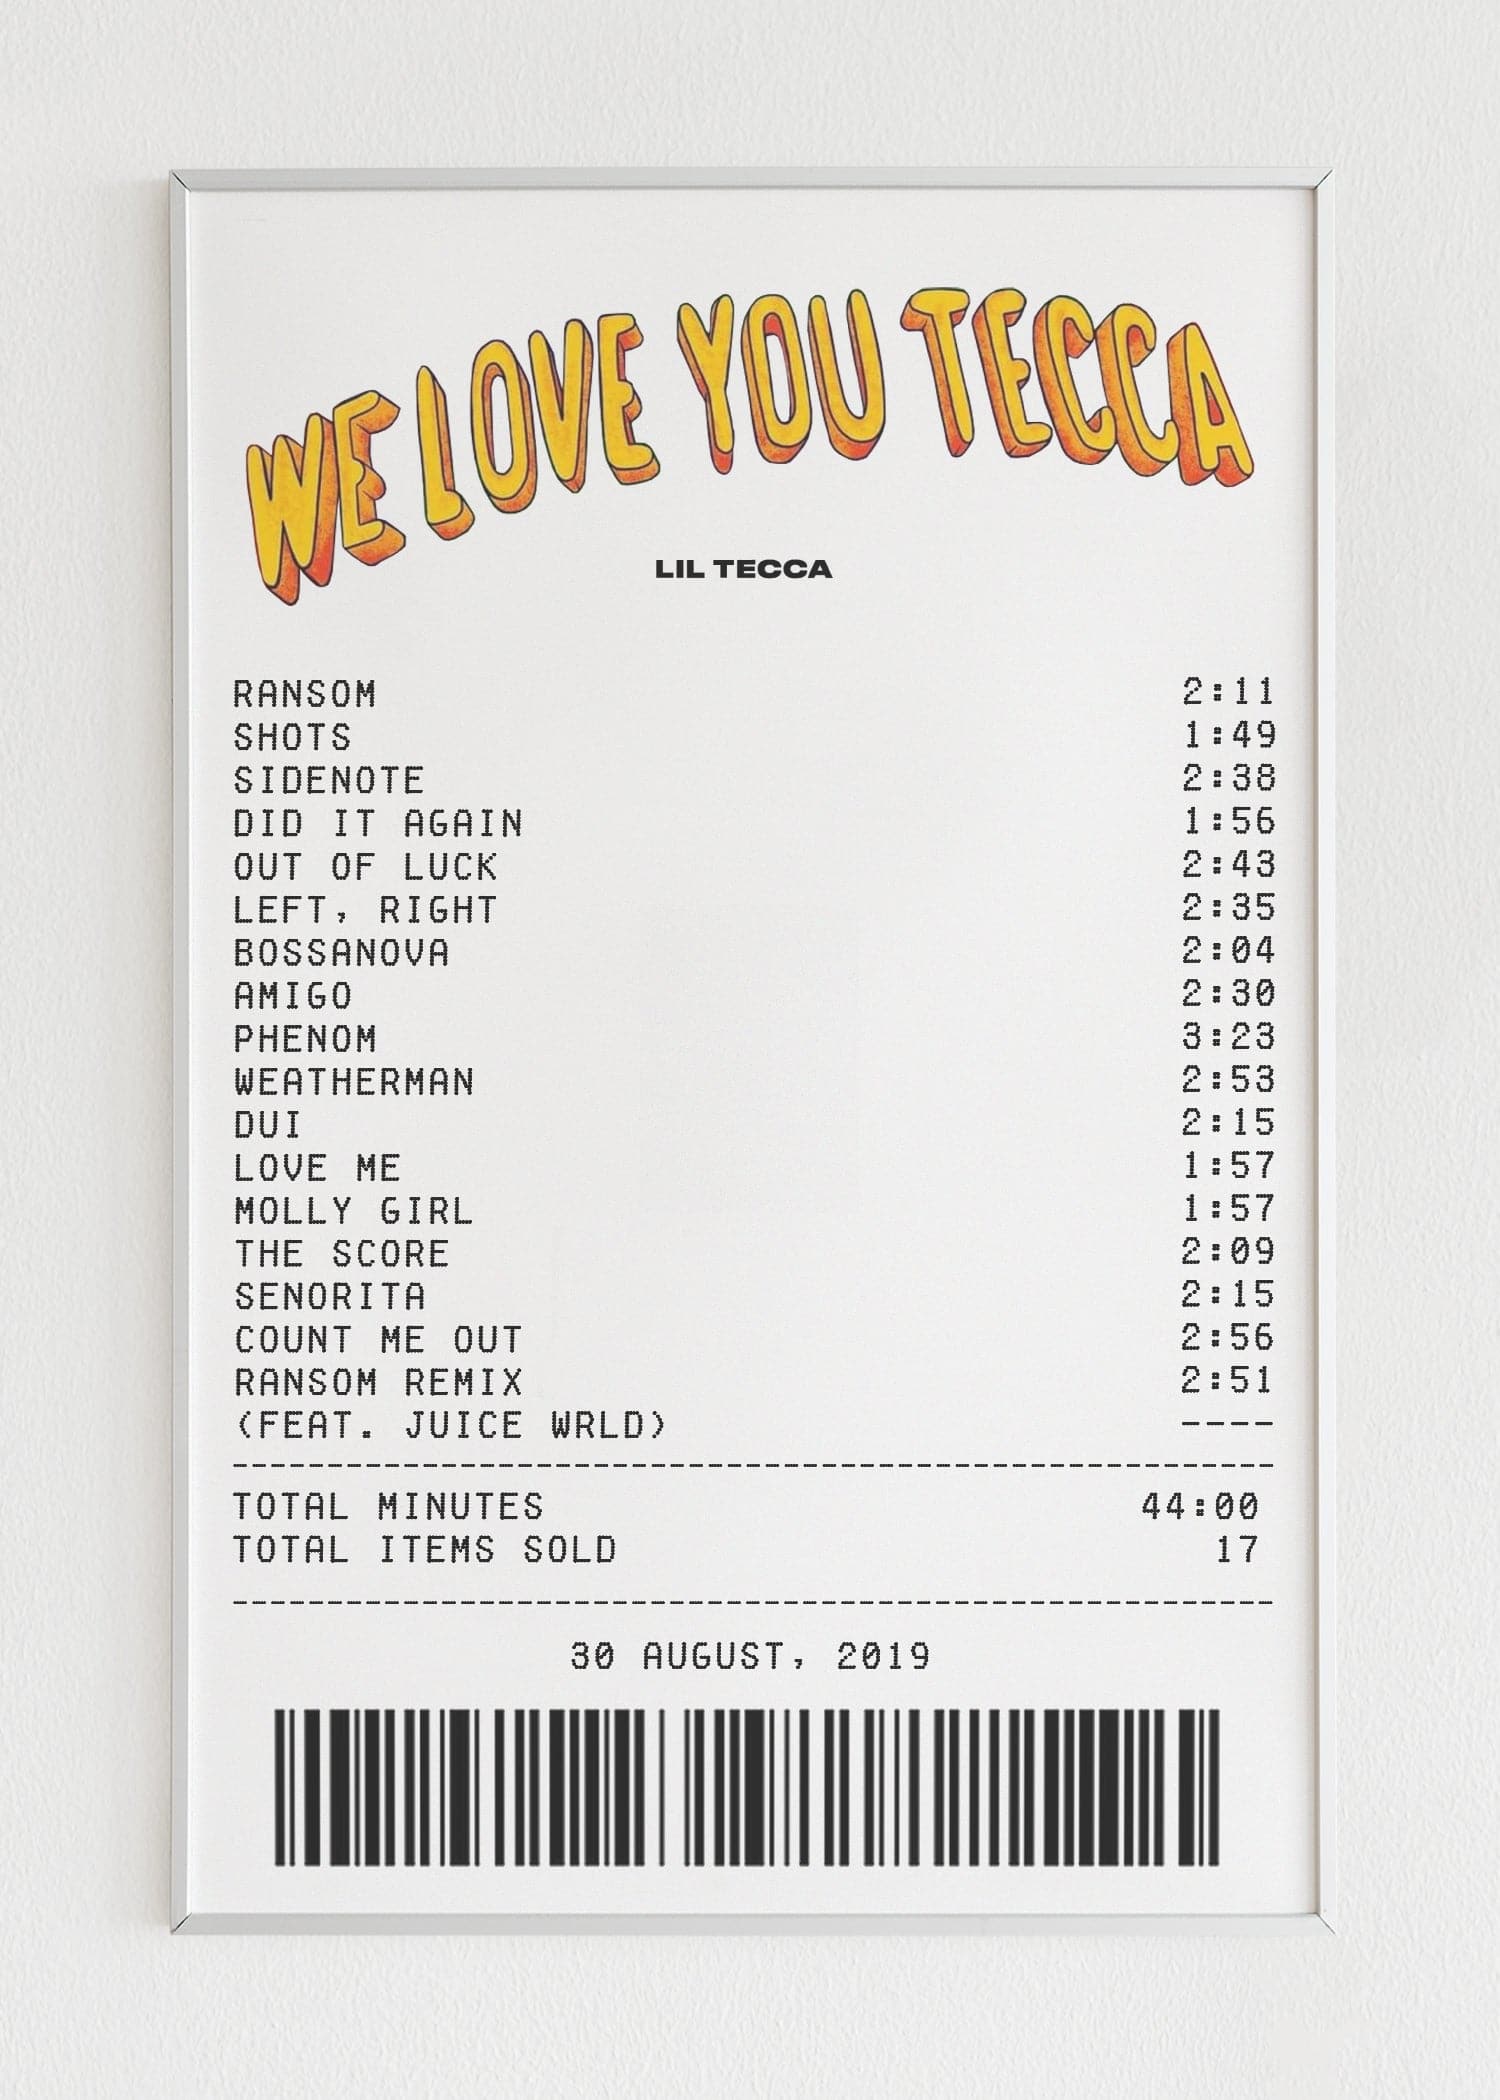 We Love You Tecca Receipt Poster